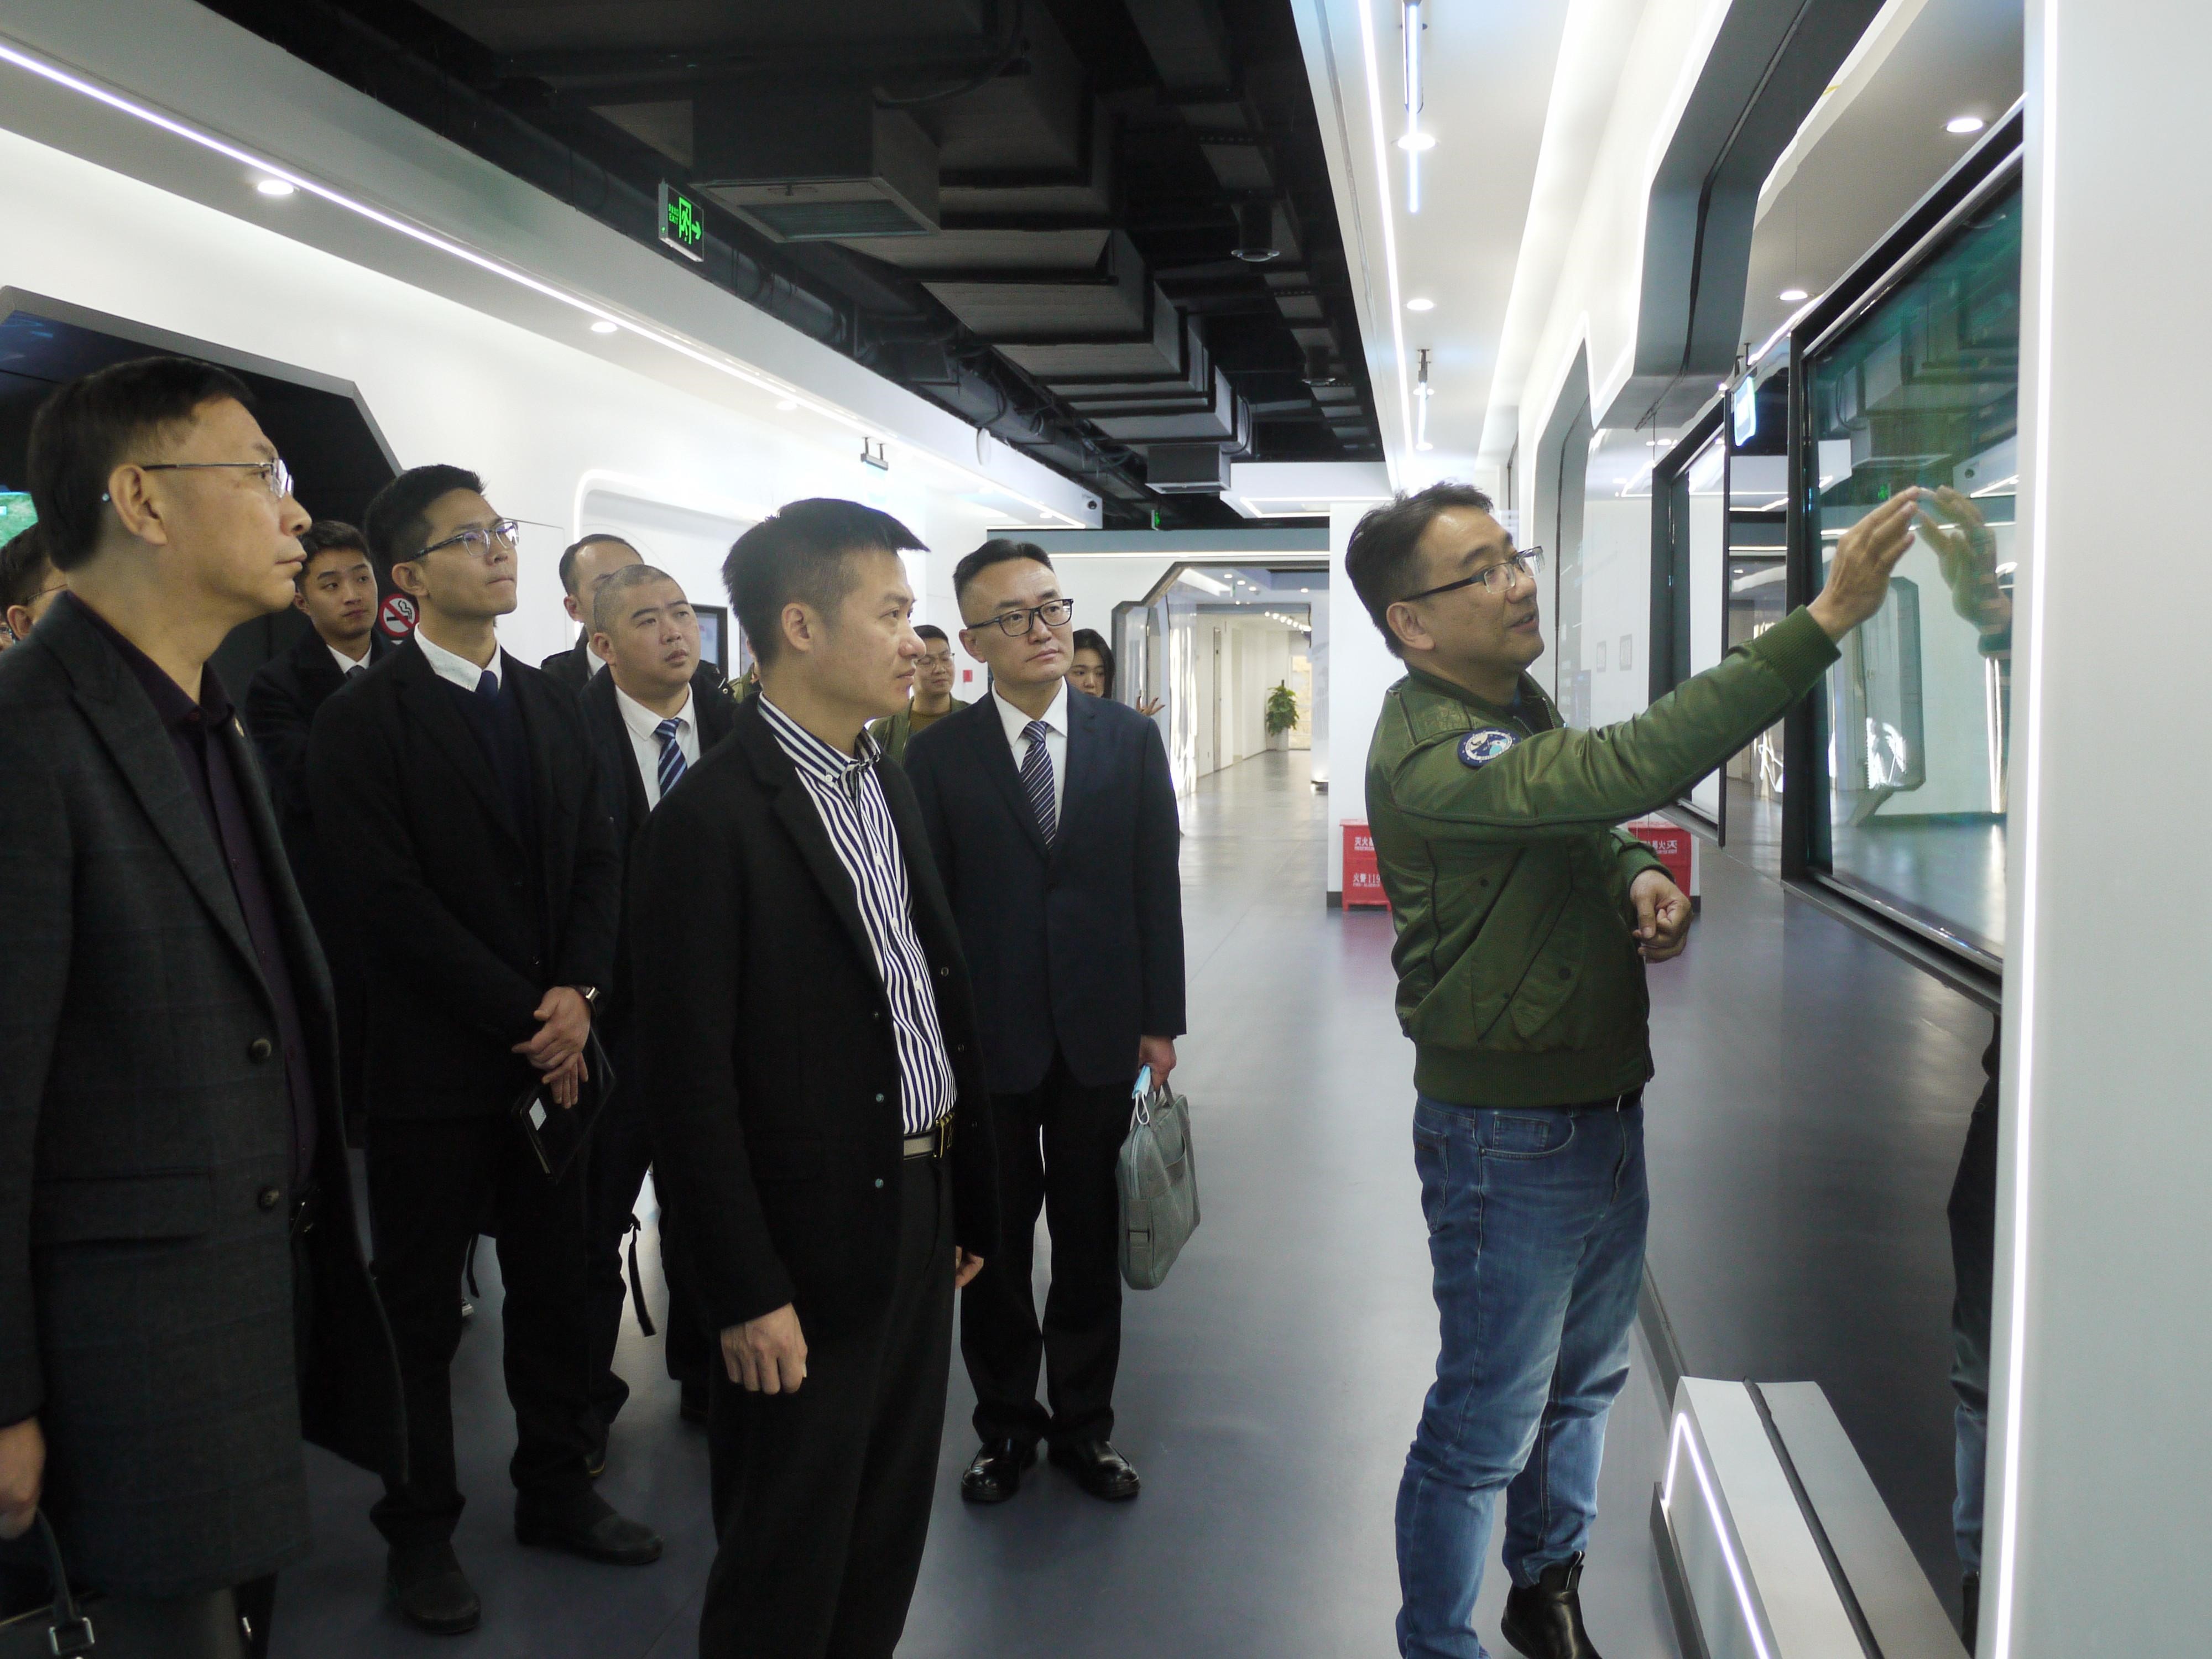 DR. CHENG YIFENG, VICE PRESIDENT OF THE GROUP, LED A TEAM TO VISIT CHENGDU ADASPACE TECHNOLOGY CO., LTD.